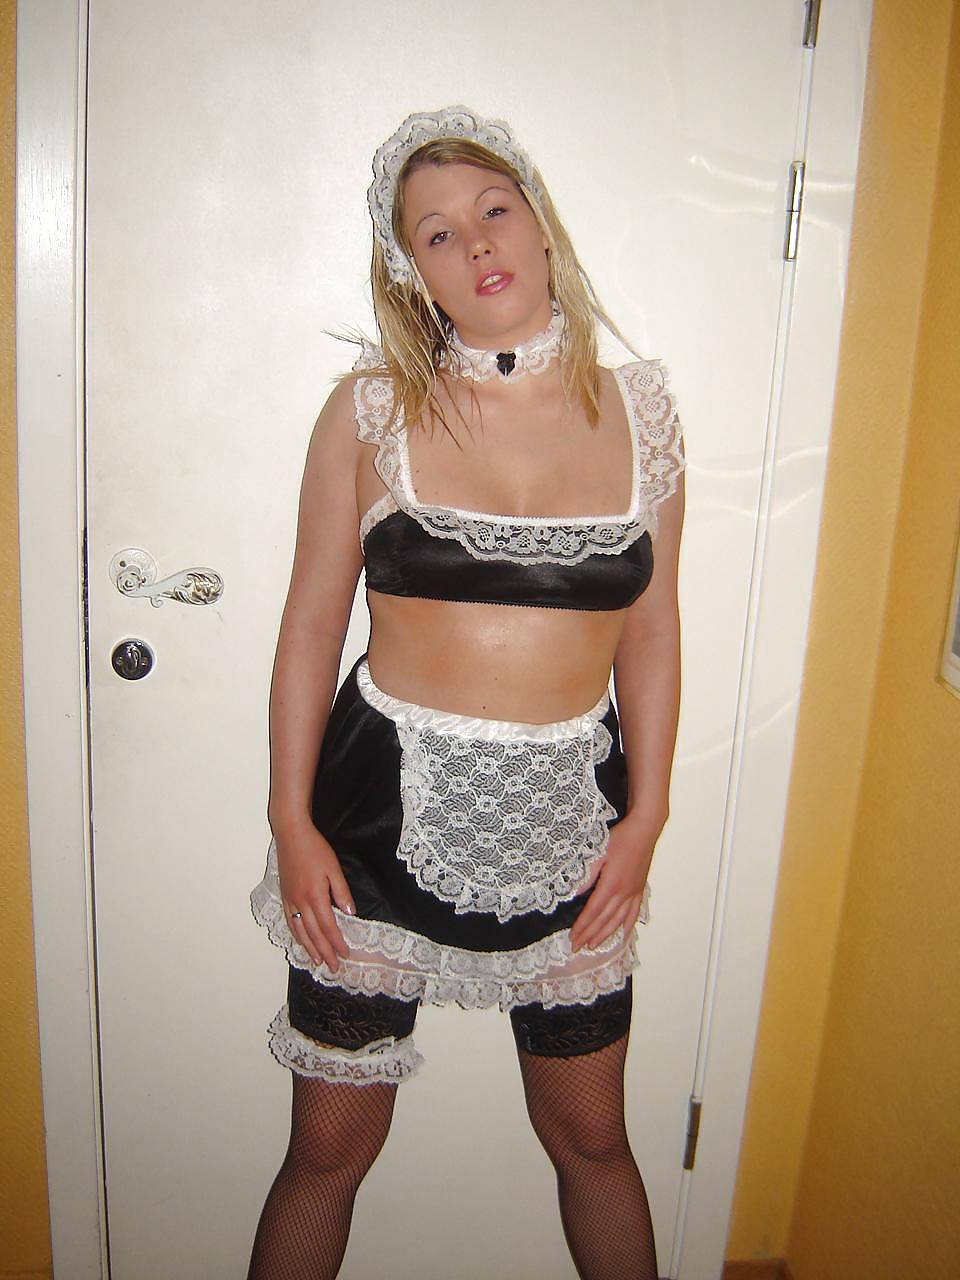 Today's porn picture # 275 adult photos